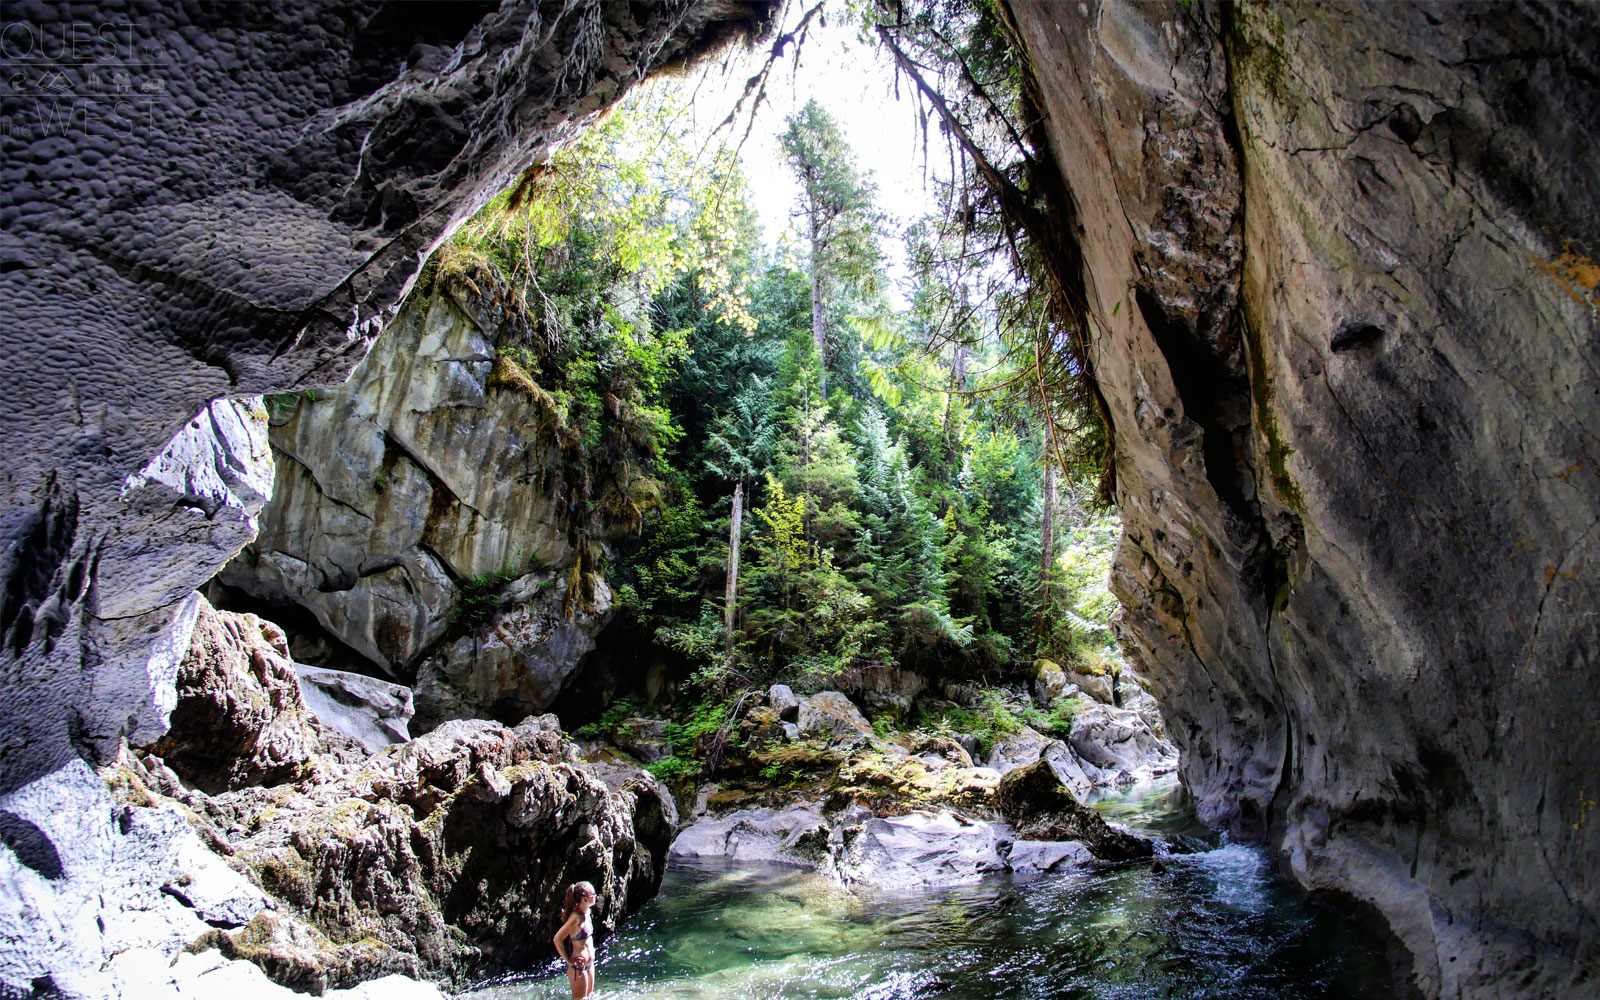 In Vancouver Island, the couple stopped at Little Huson Cave Regional Park. The park features limestone and rock arch formations, deep pools, and a variety of tunnels that have creeks flowing for as long as 60 meters (196 feet) underground.